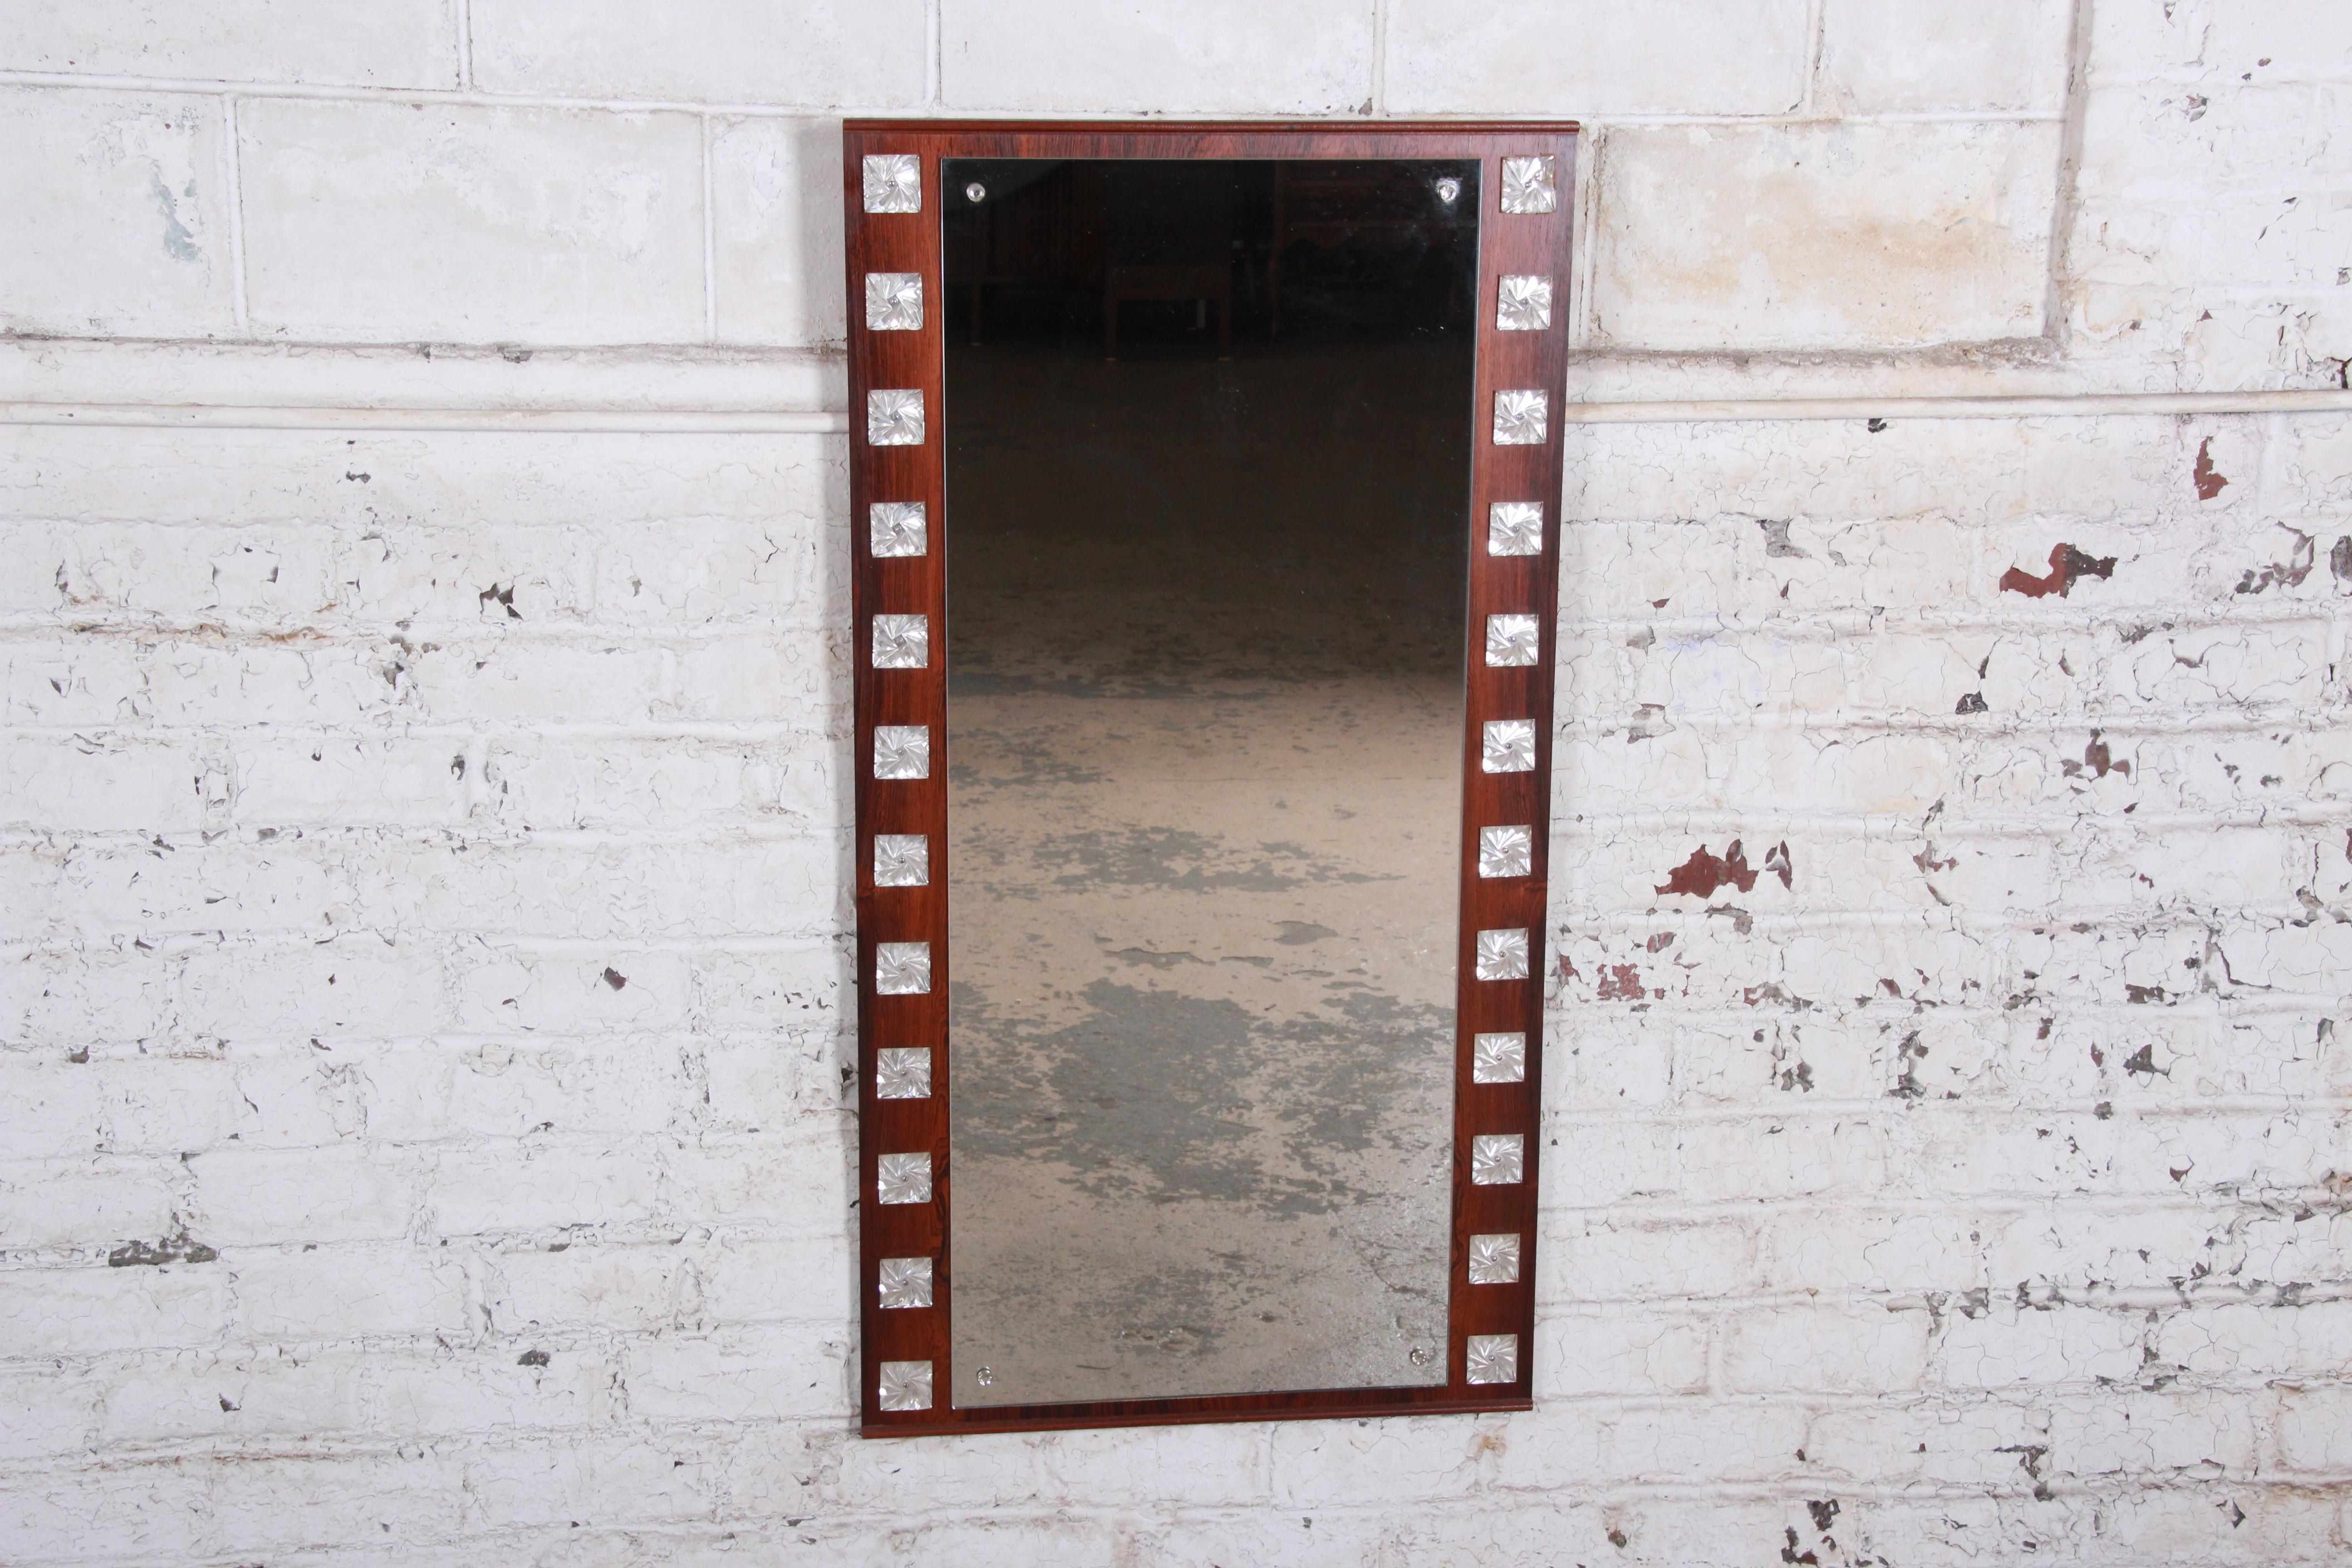 A gorgeous midcentury Swedish modern mirror designed by Erik Höglund for Eriksmålaglas of Sweden. The mirror features a stunning rosewood frame with decorative prisms on each side. The original label is present on the backside. The mirror is in very